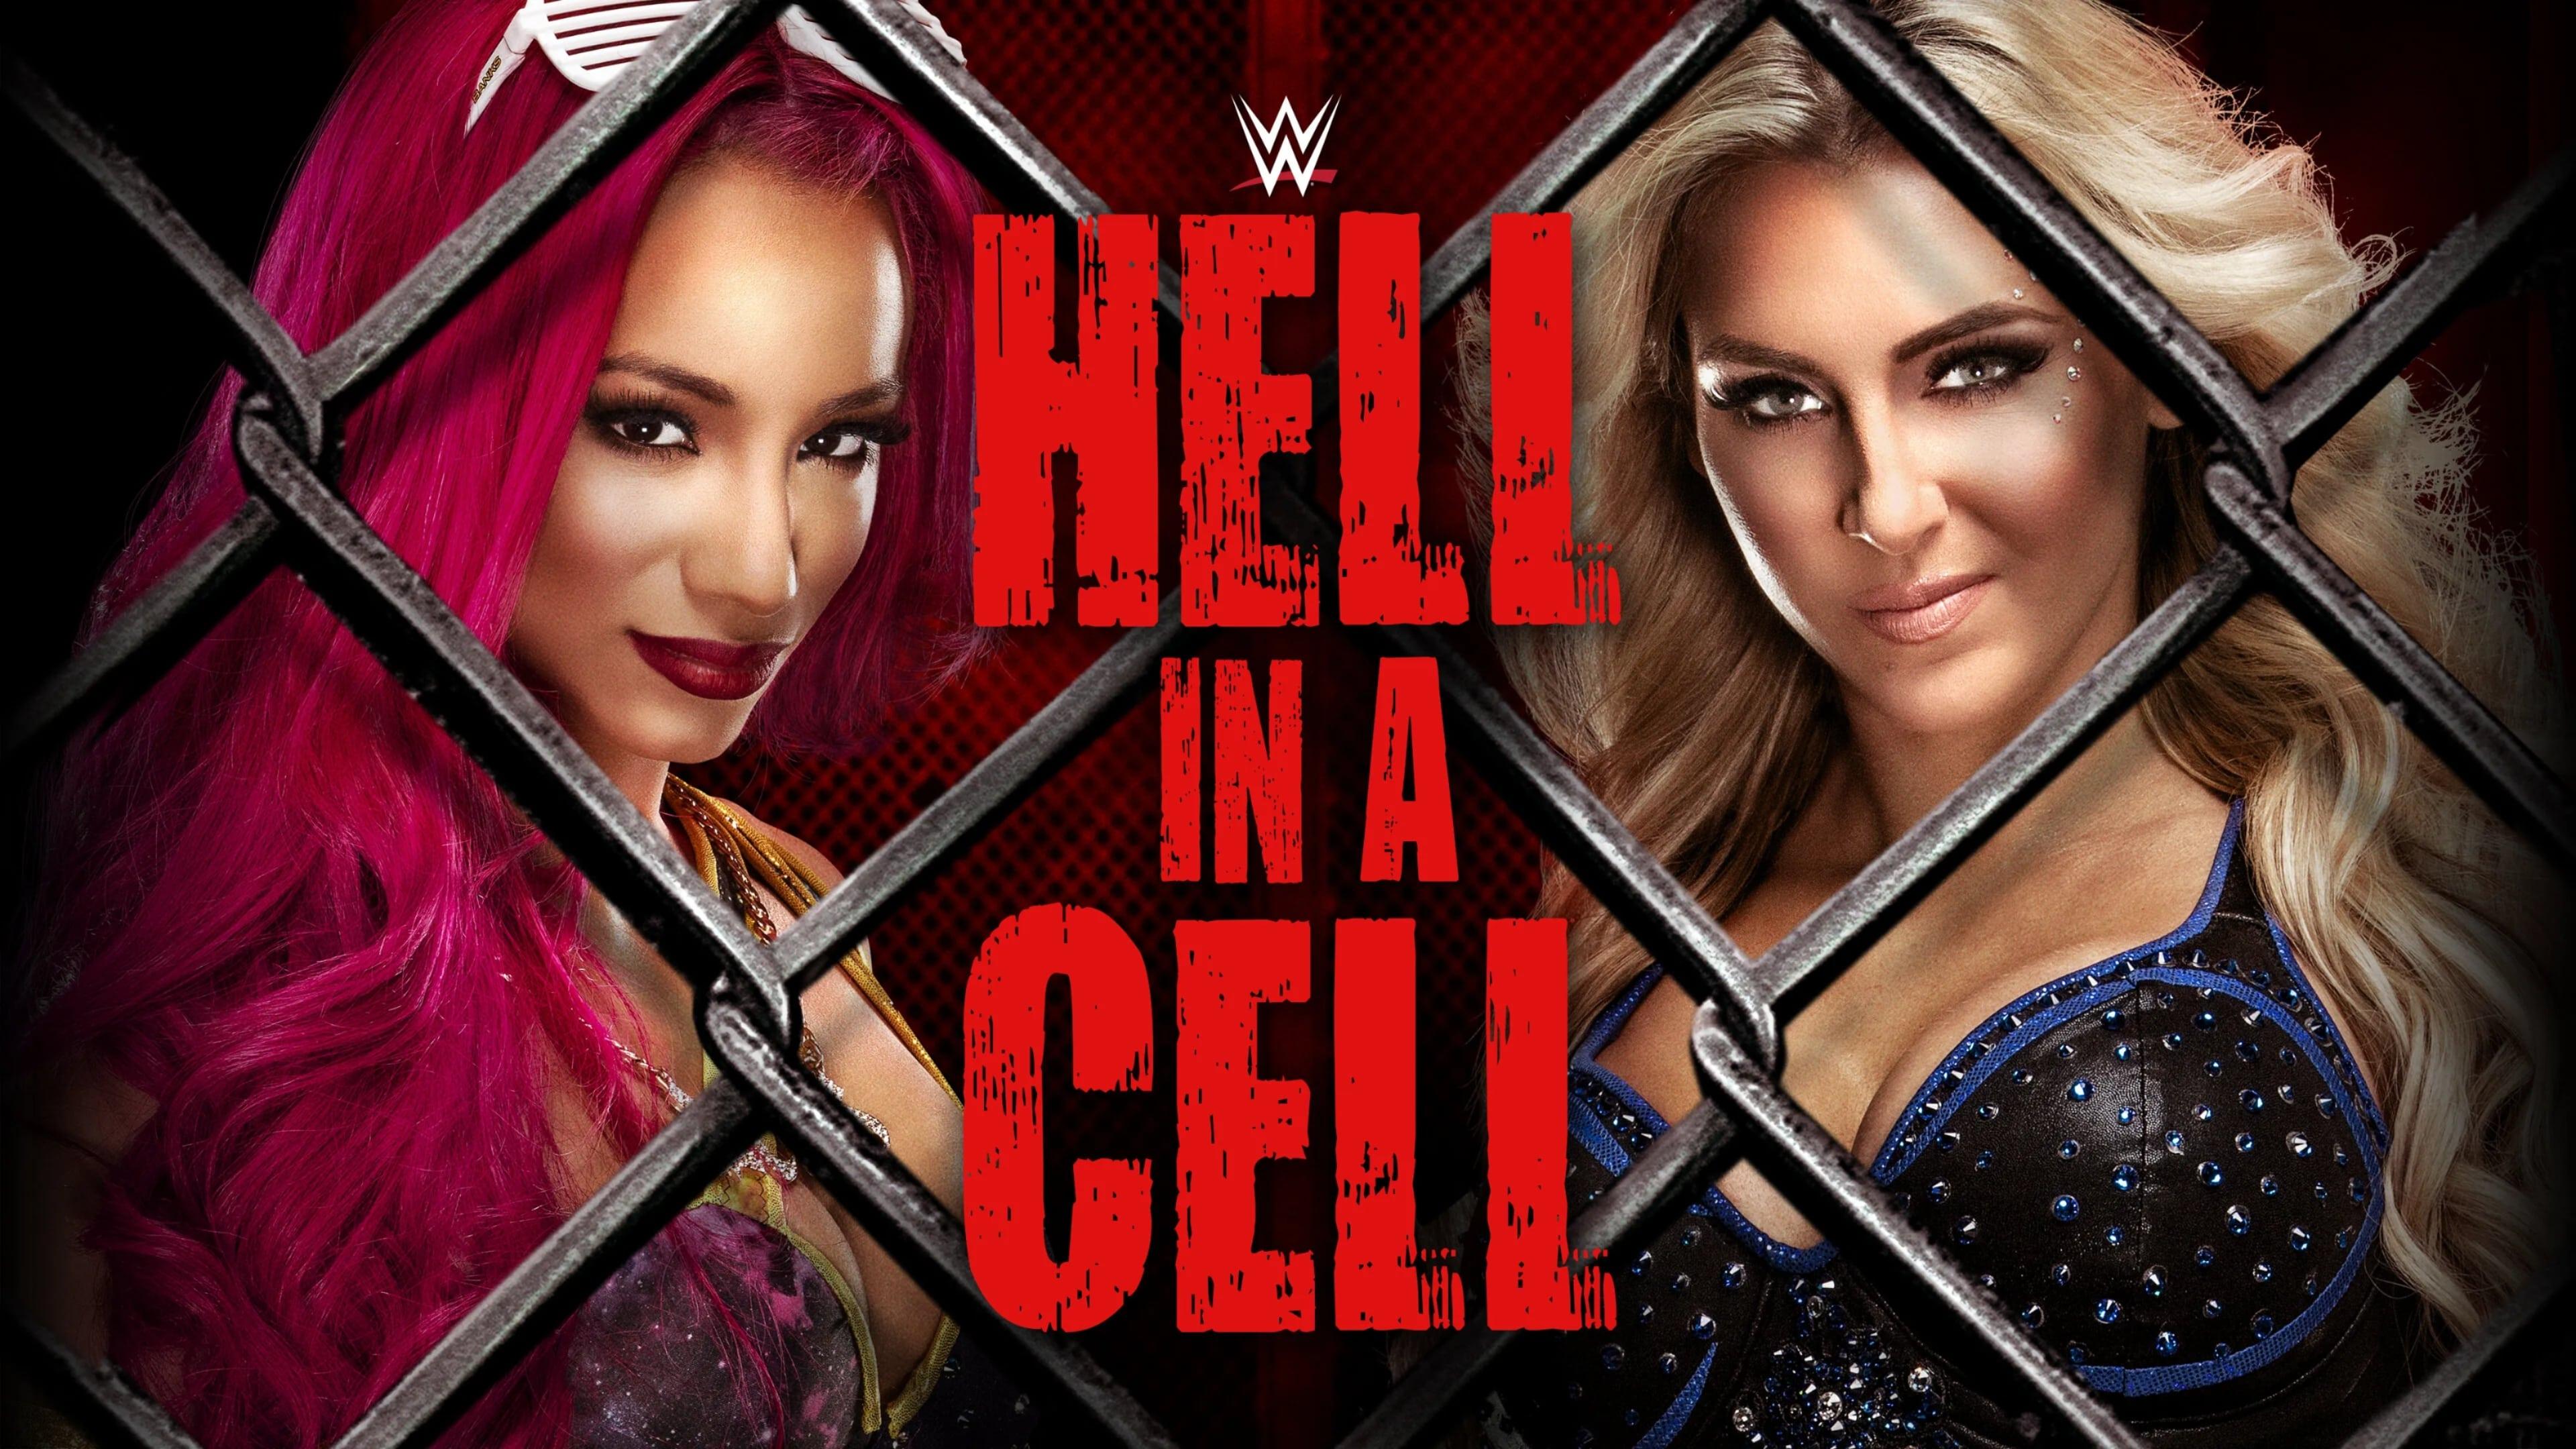 WWE Hell in a Cell 2016 backdrop